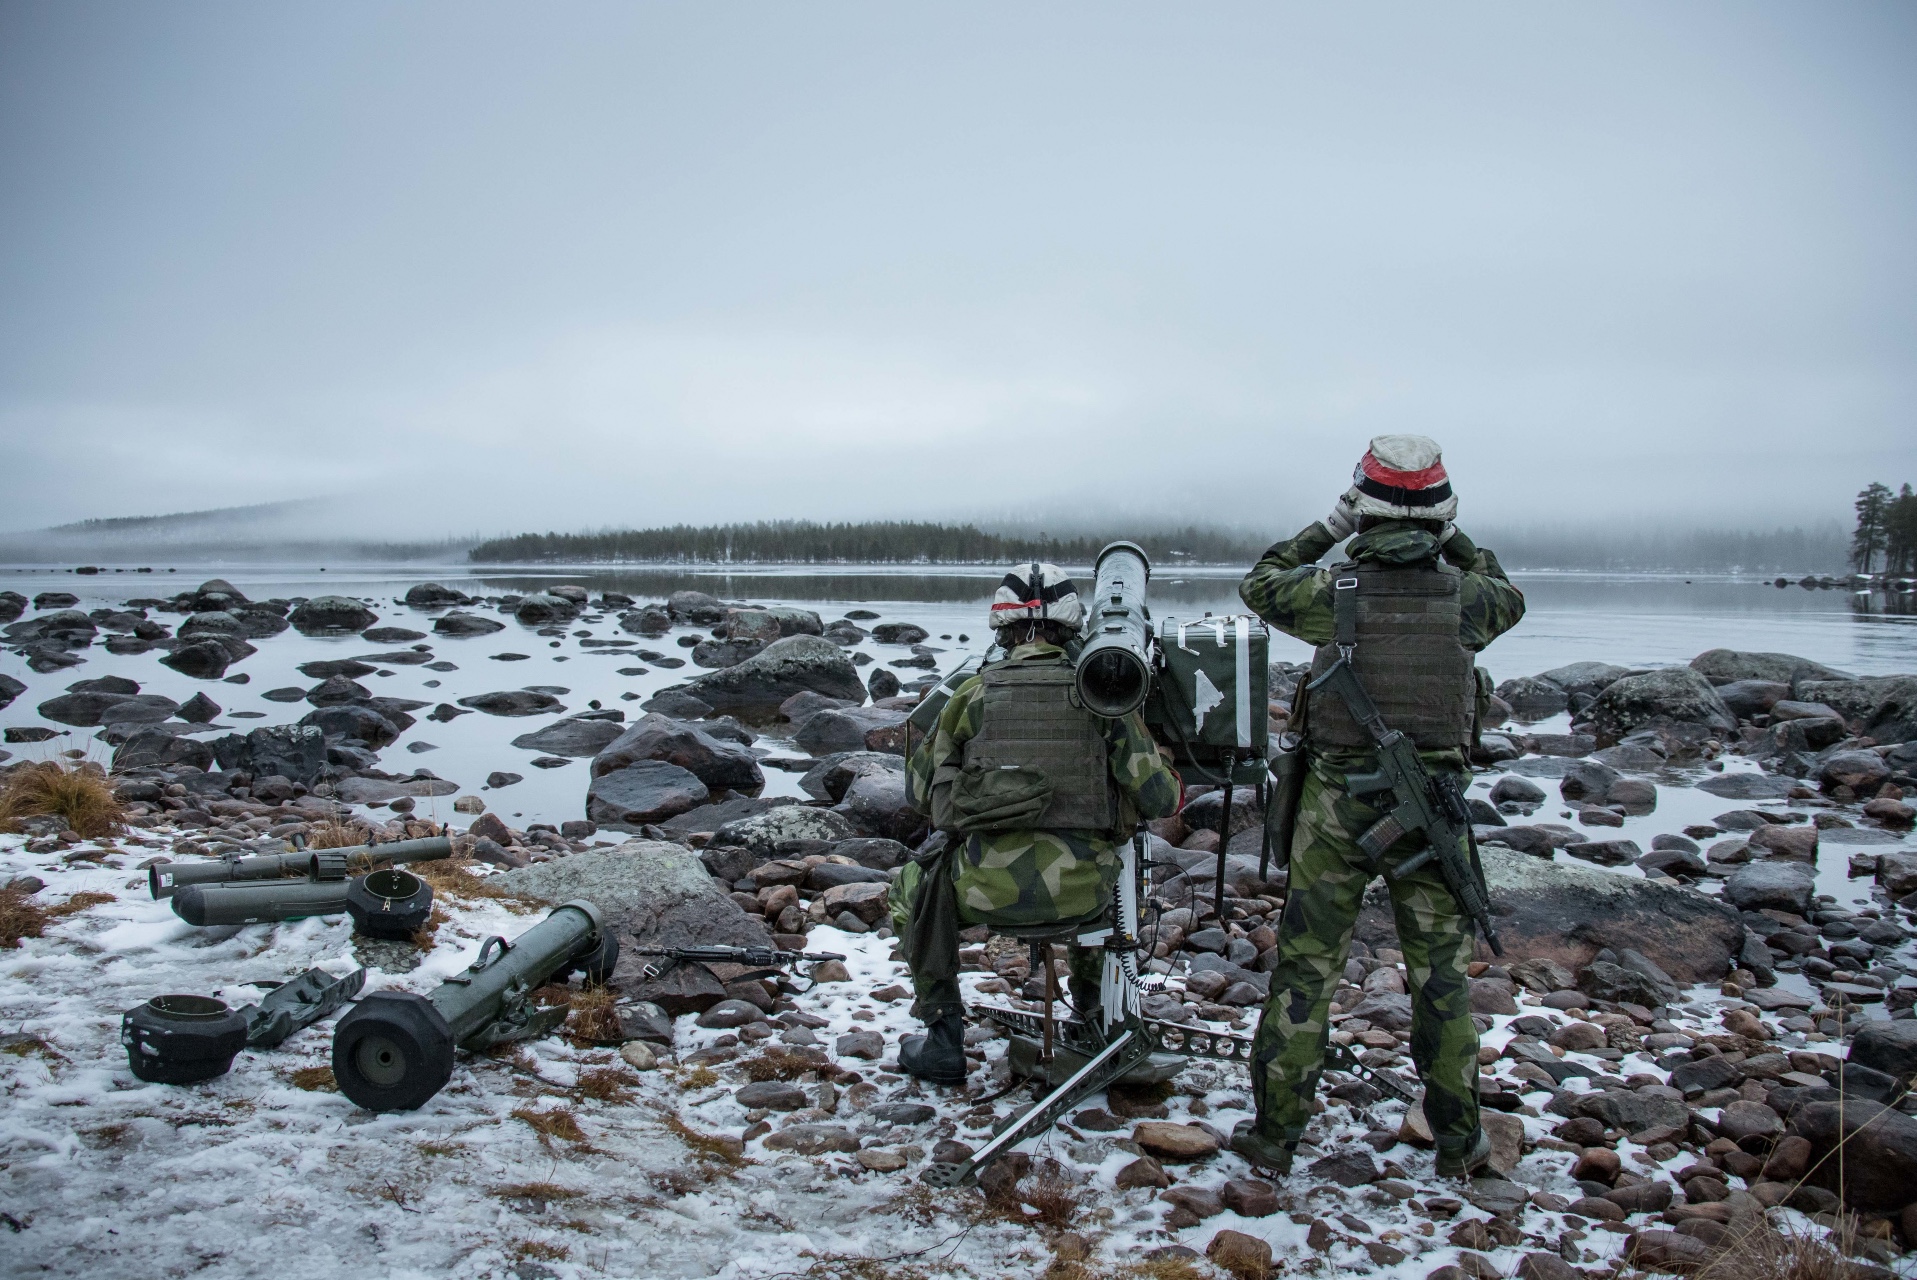 Swedish armed forces during Trident Juncture 2018